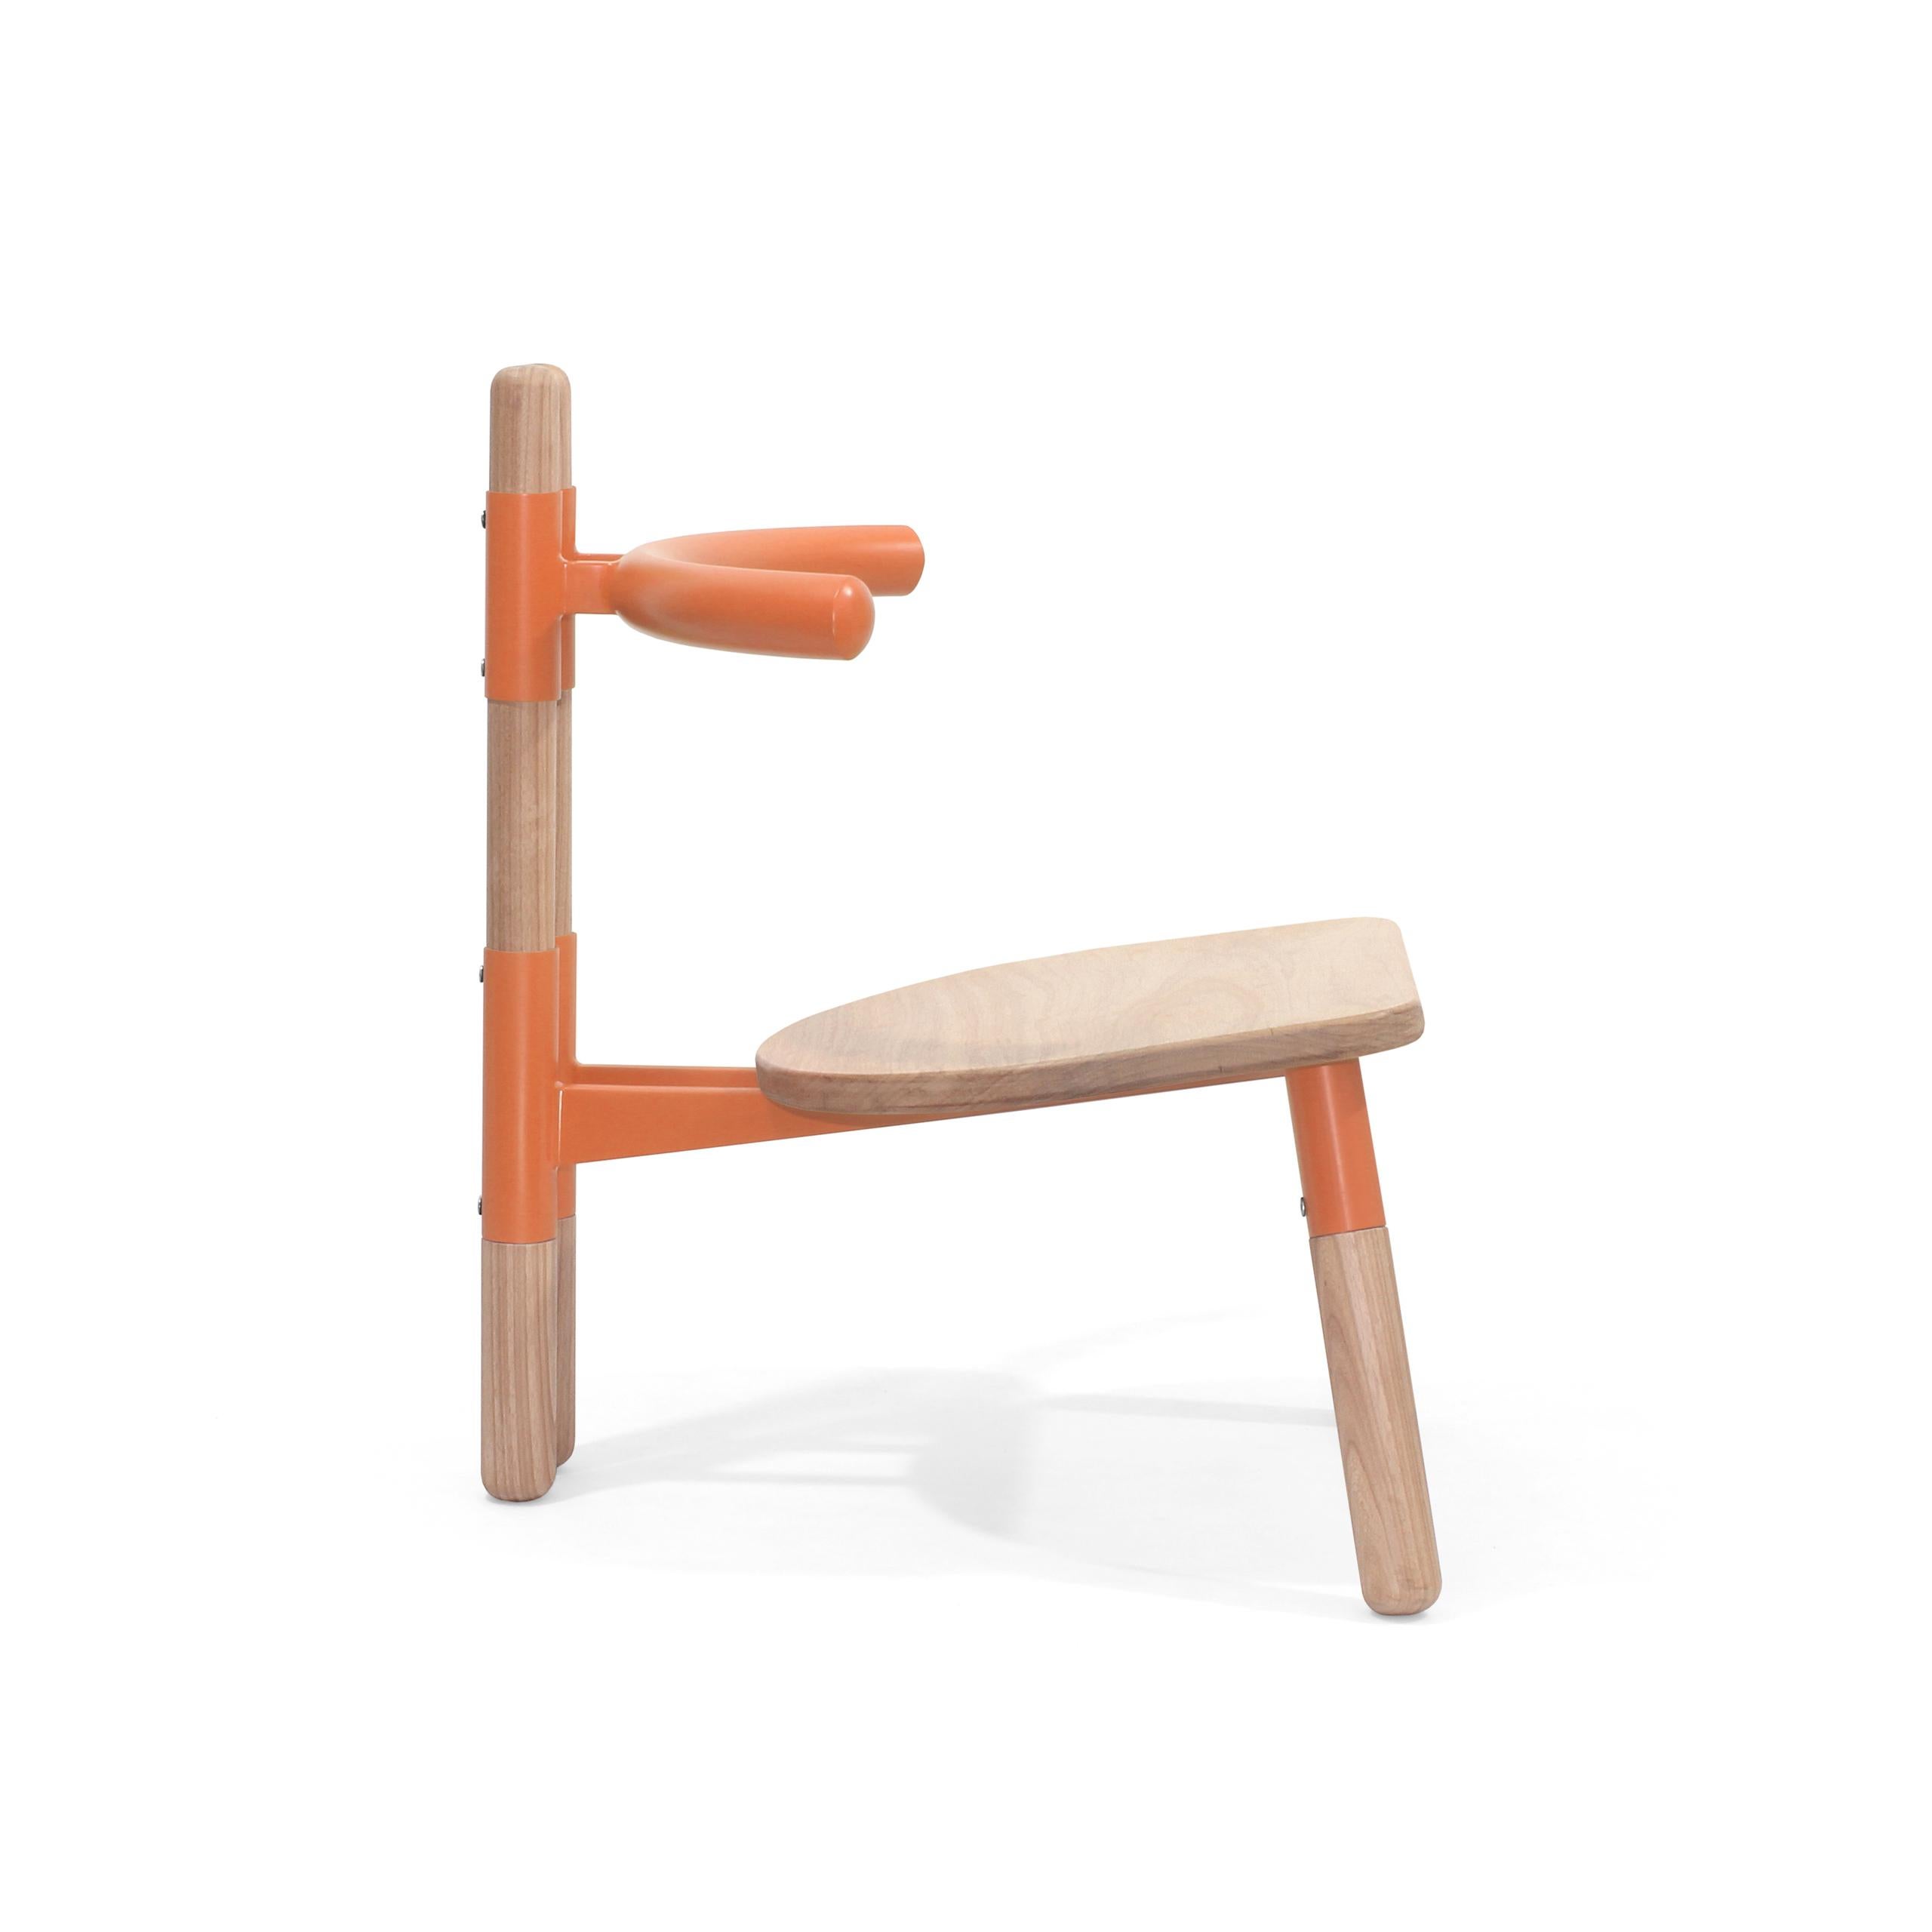 Brazilian Handmade PK13 Armchair, Steel Structure and Turned Wood Legs by Paulo Kobylka For Sale